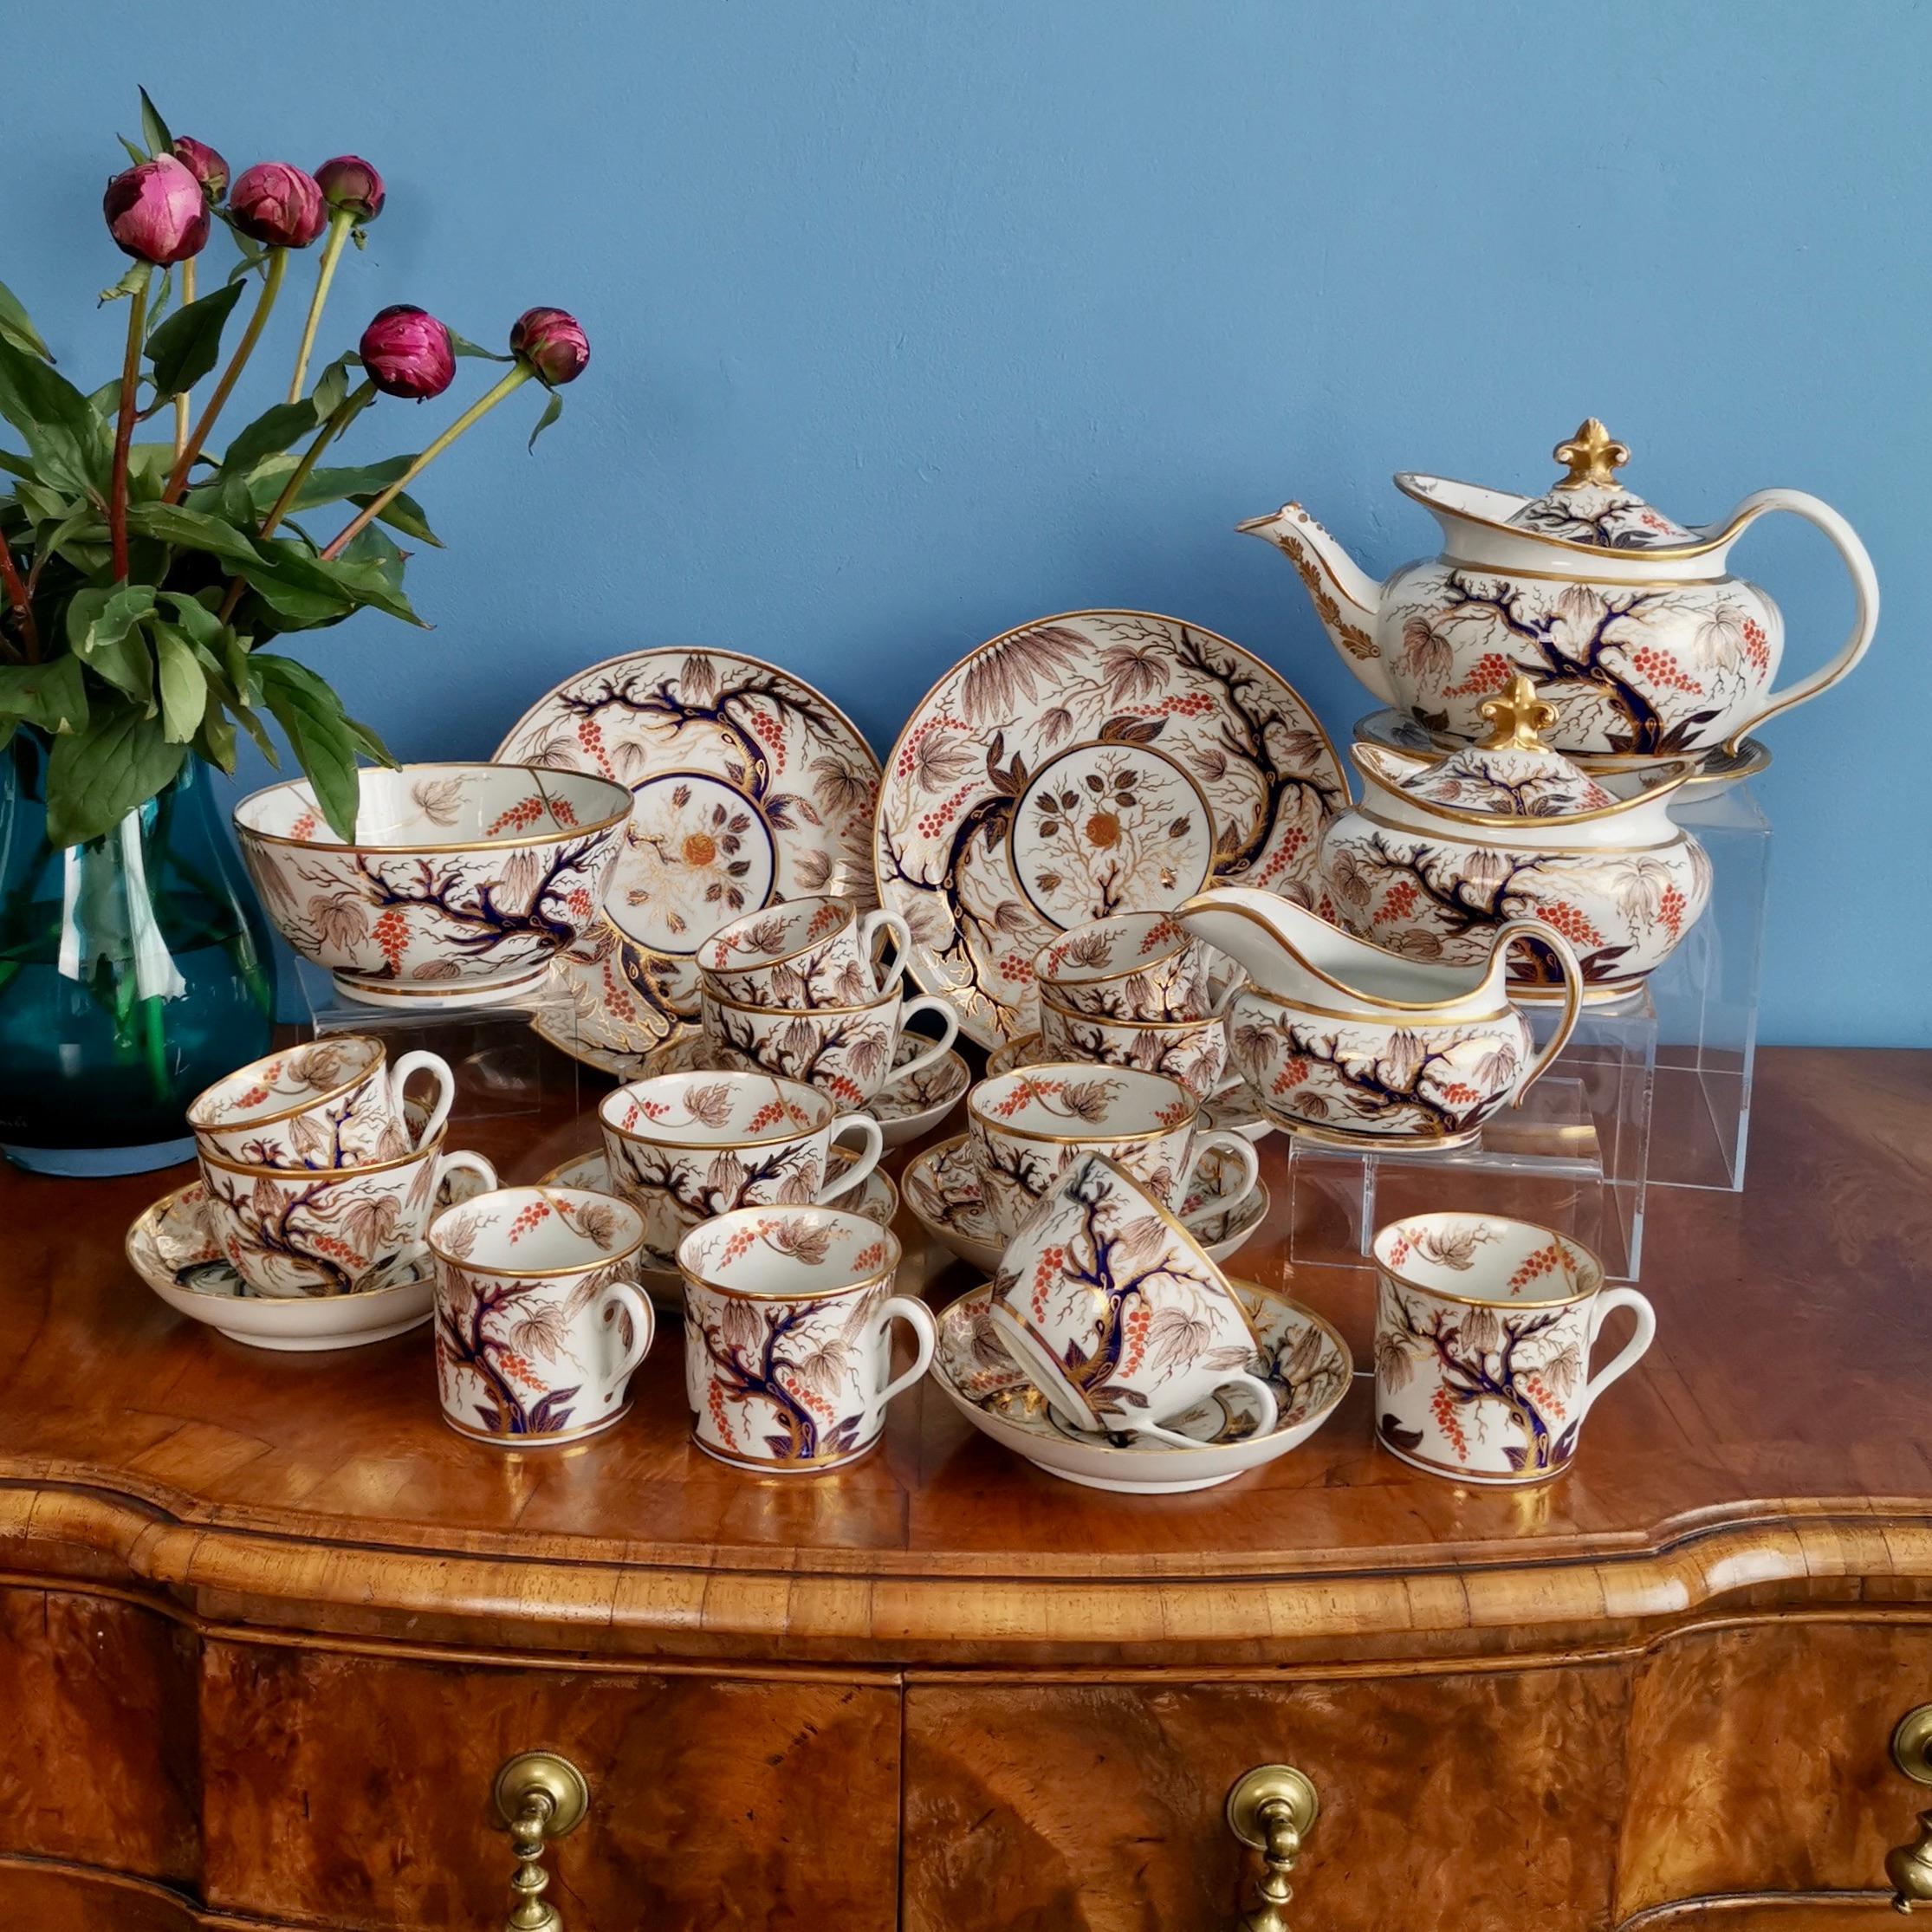 This is spectacular full tea service made by New Hall around the year 1810. The service consists of a lidded teapot on a stand, a lidded sucrier, a milk jug, six teacups and saucers, six coffee cans, two large cake plates of different sizes, and a